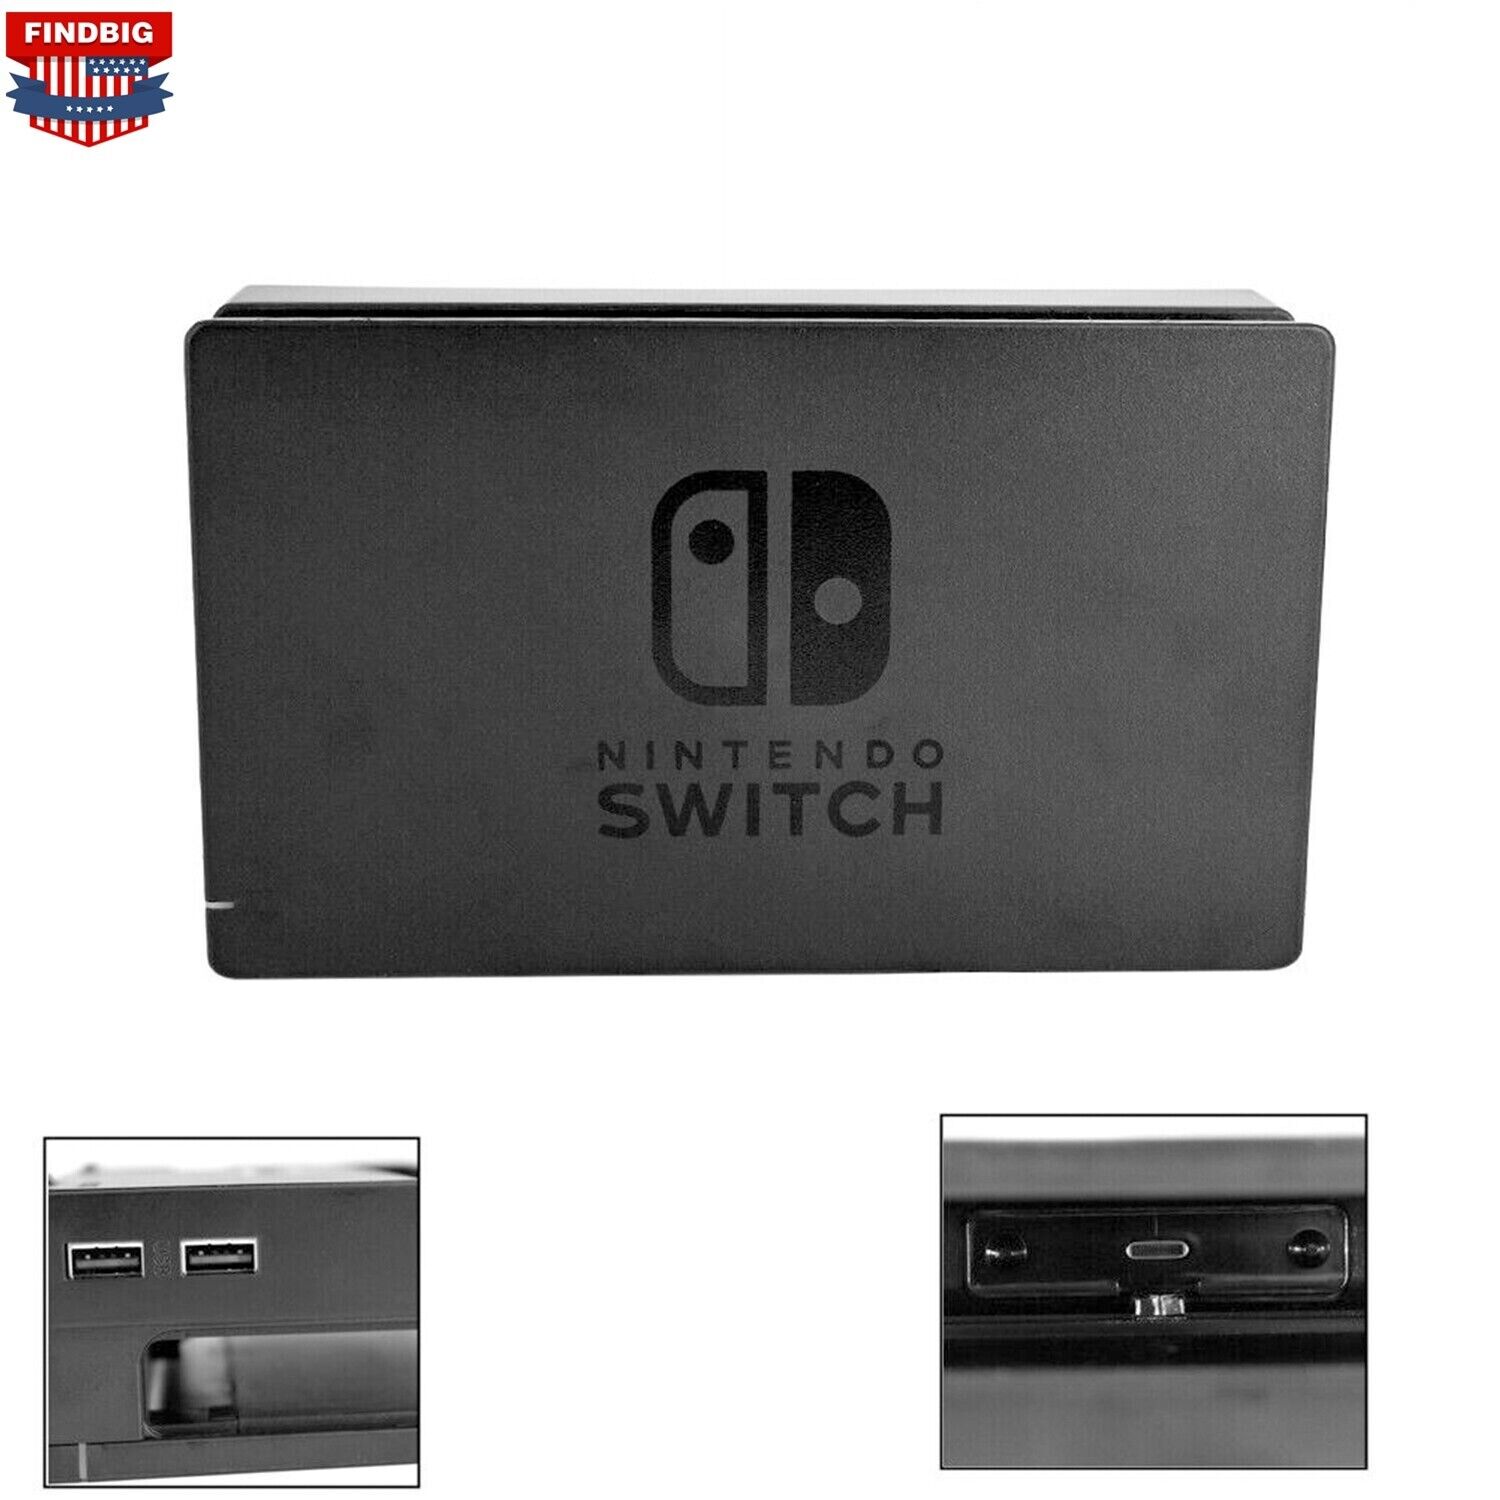 NEW Nintendo Switch Charging Base Station Console Screen TV Dock Station US findbig HAC-007